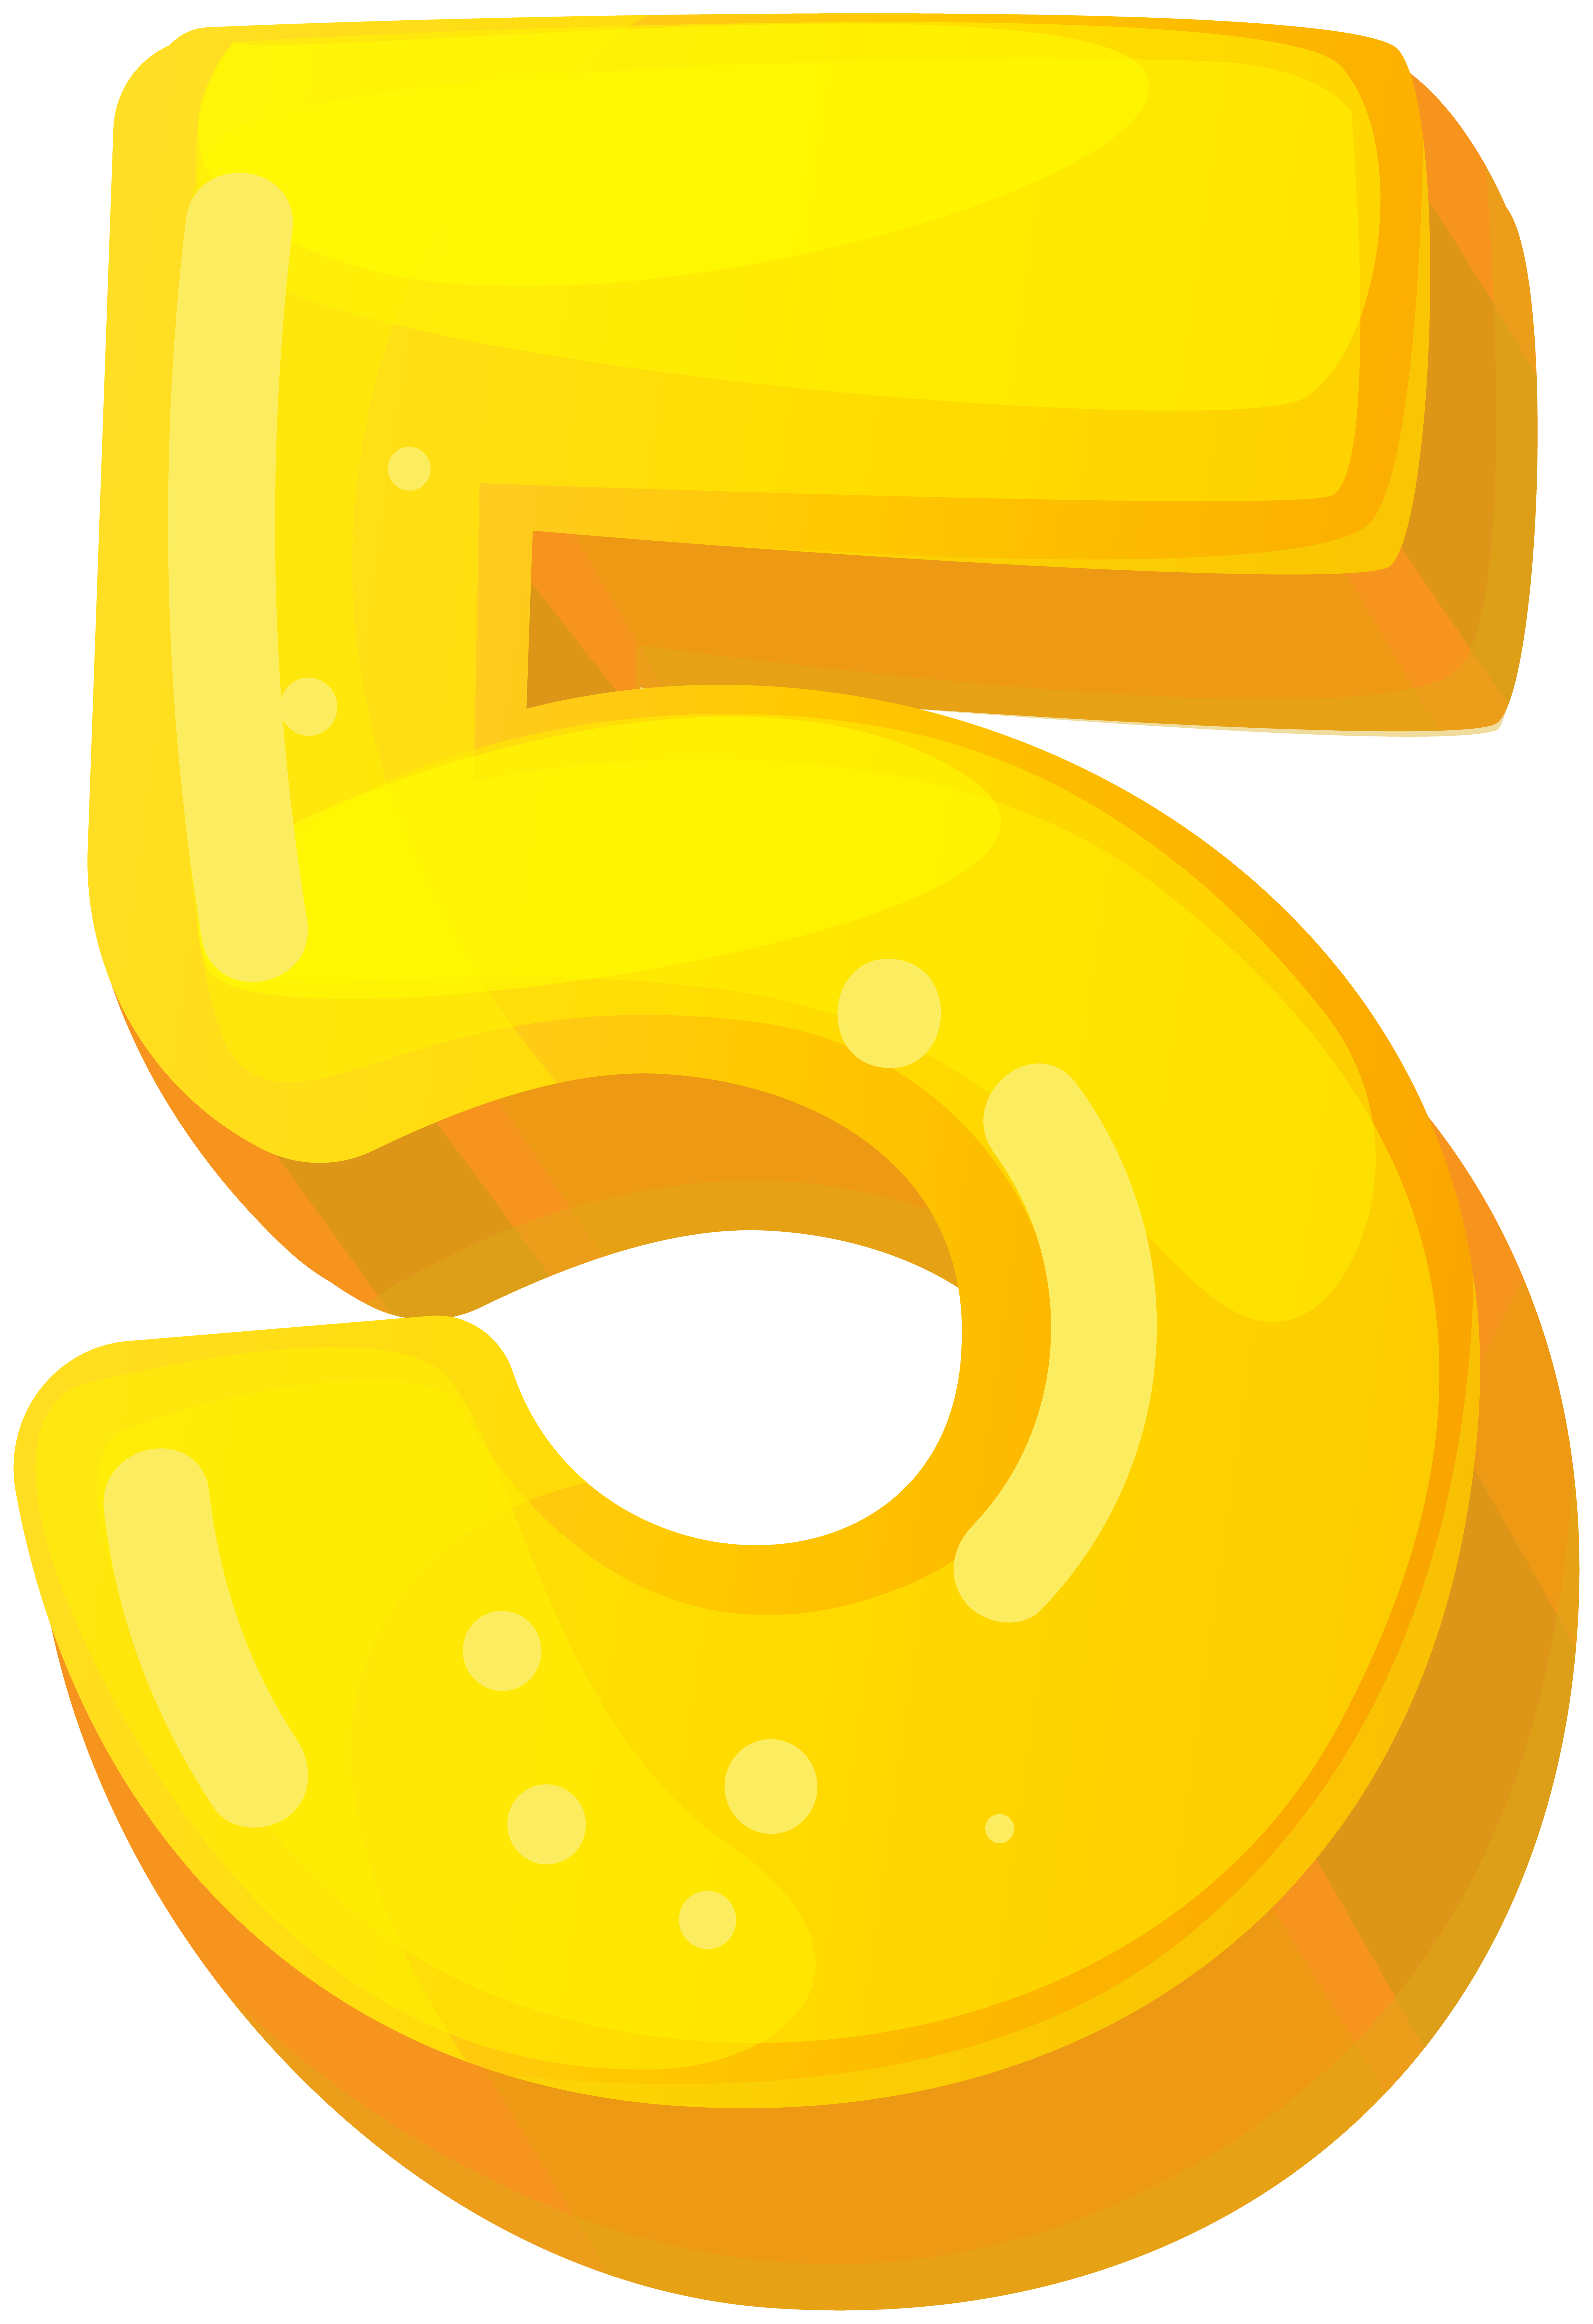 Number 5 png images